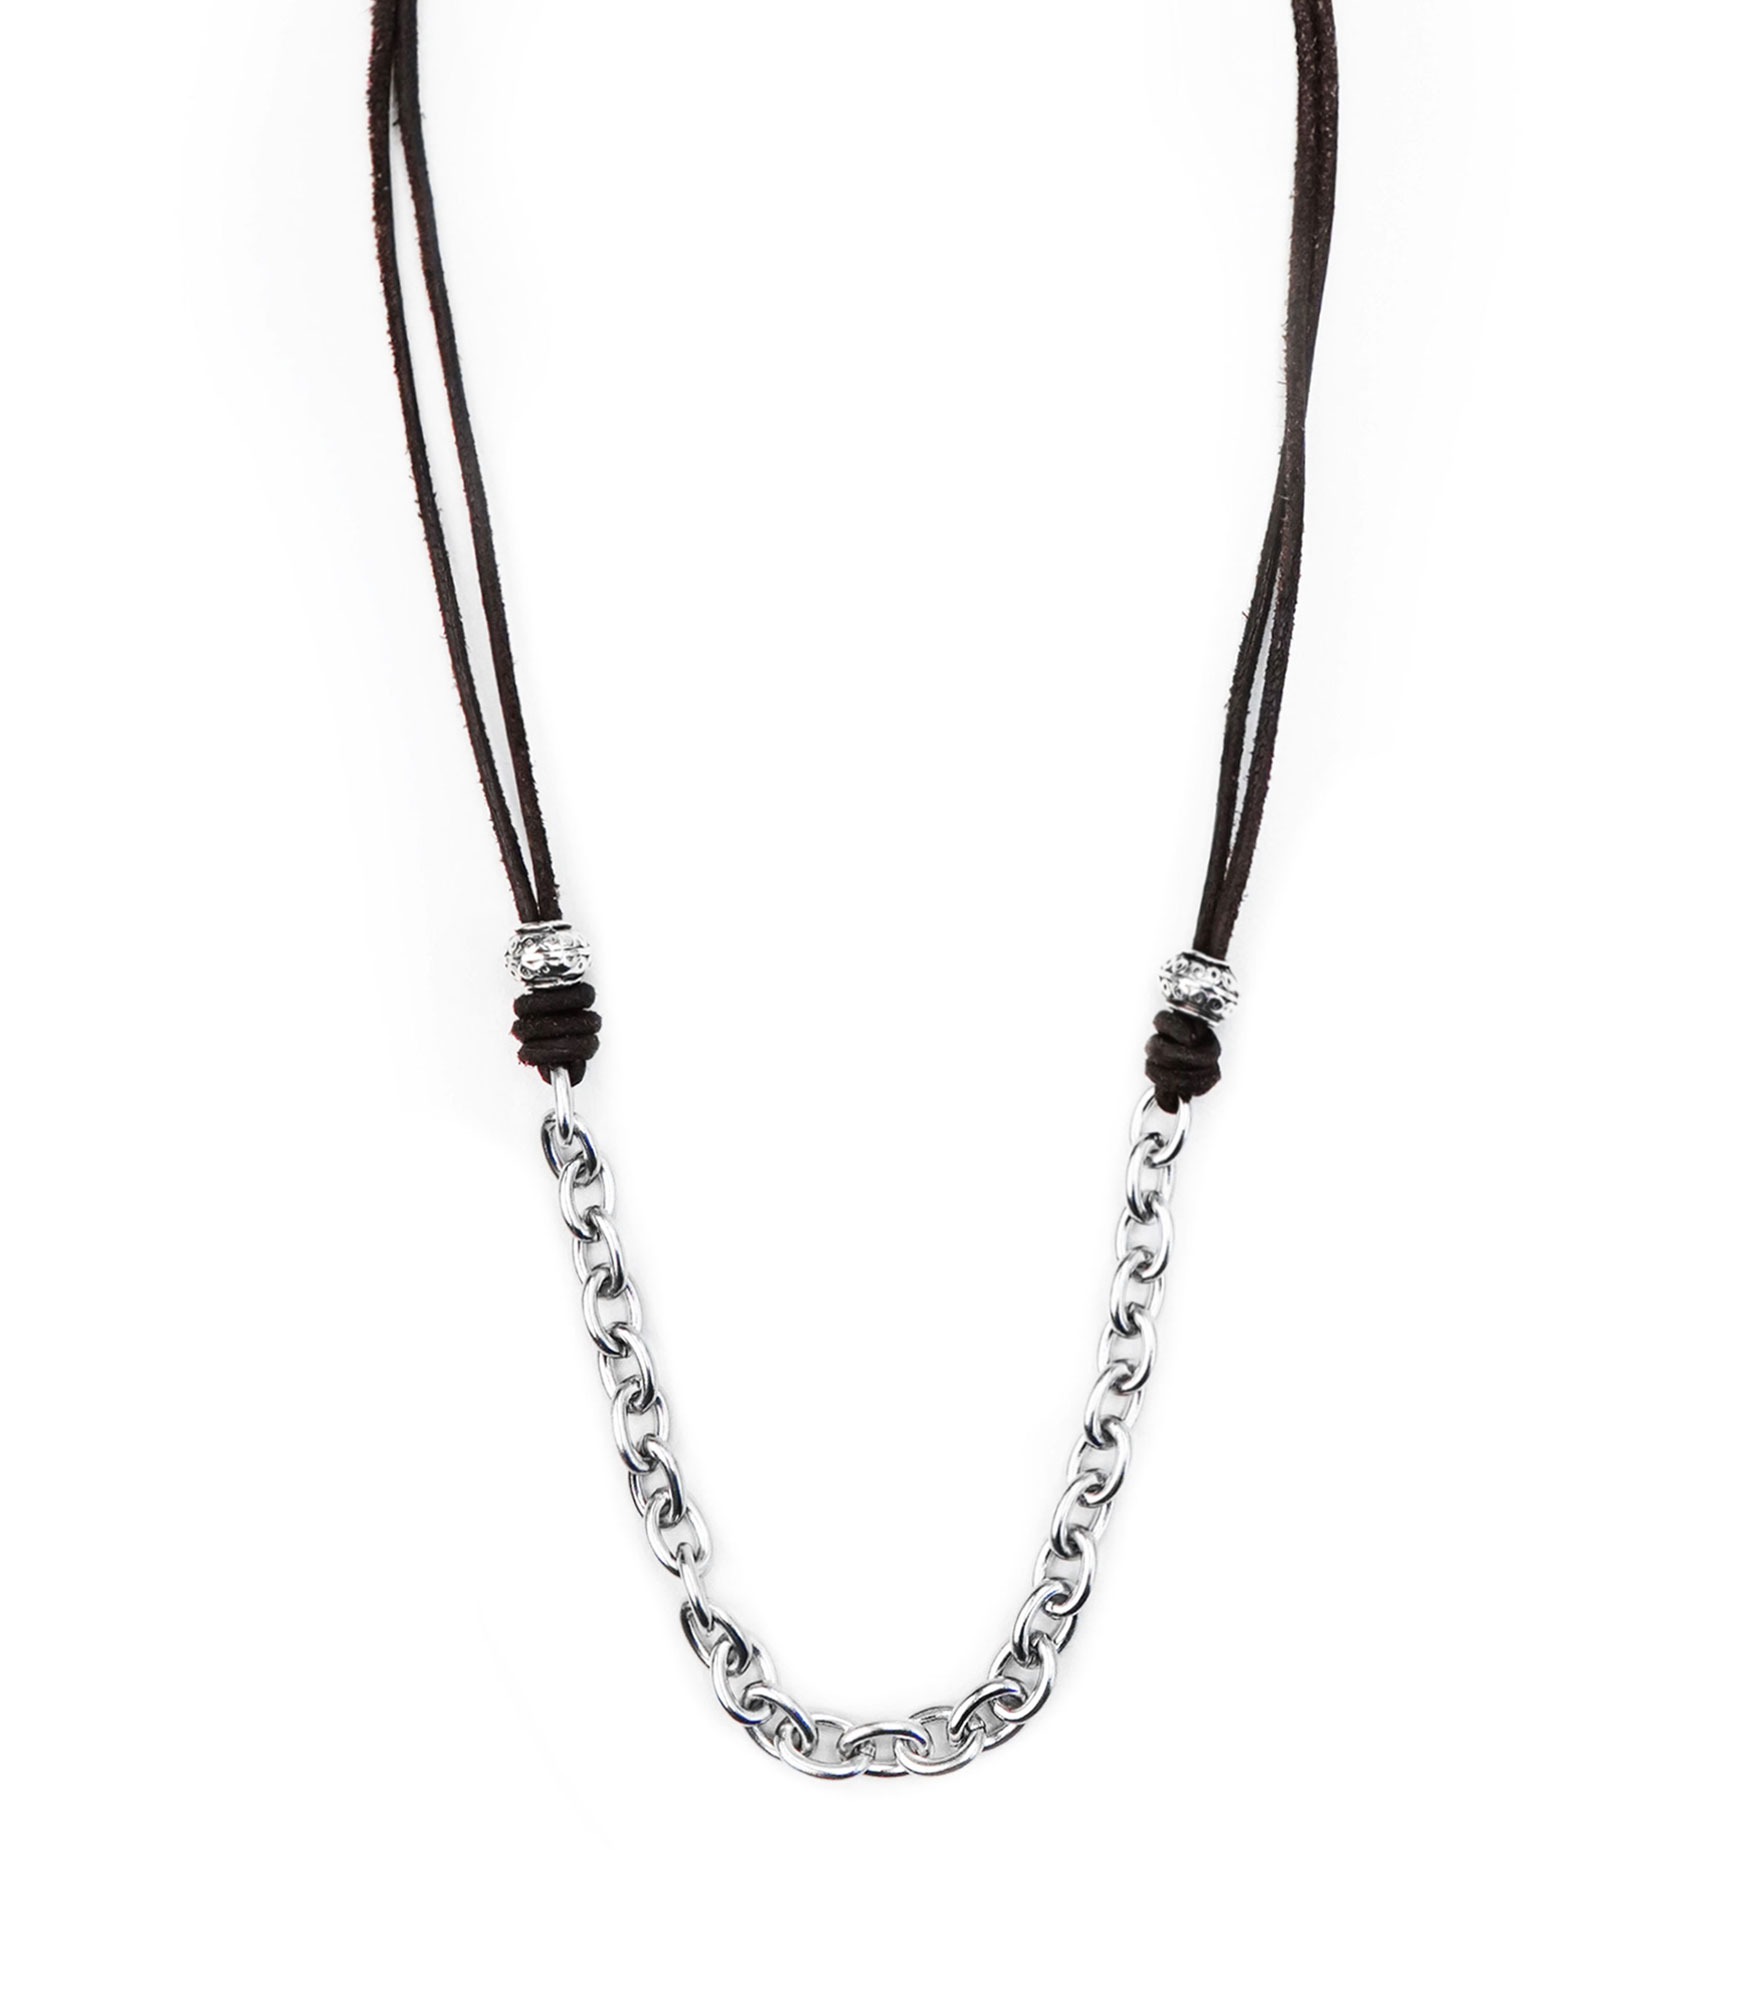 LEATHER CHAIN MIX NECKLACE